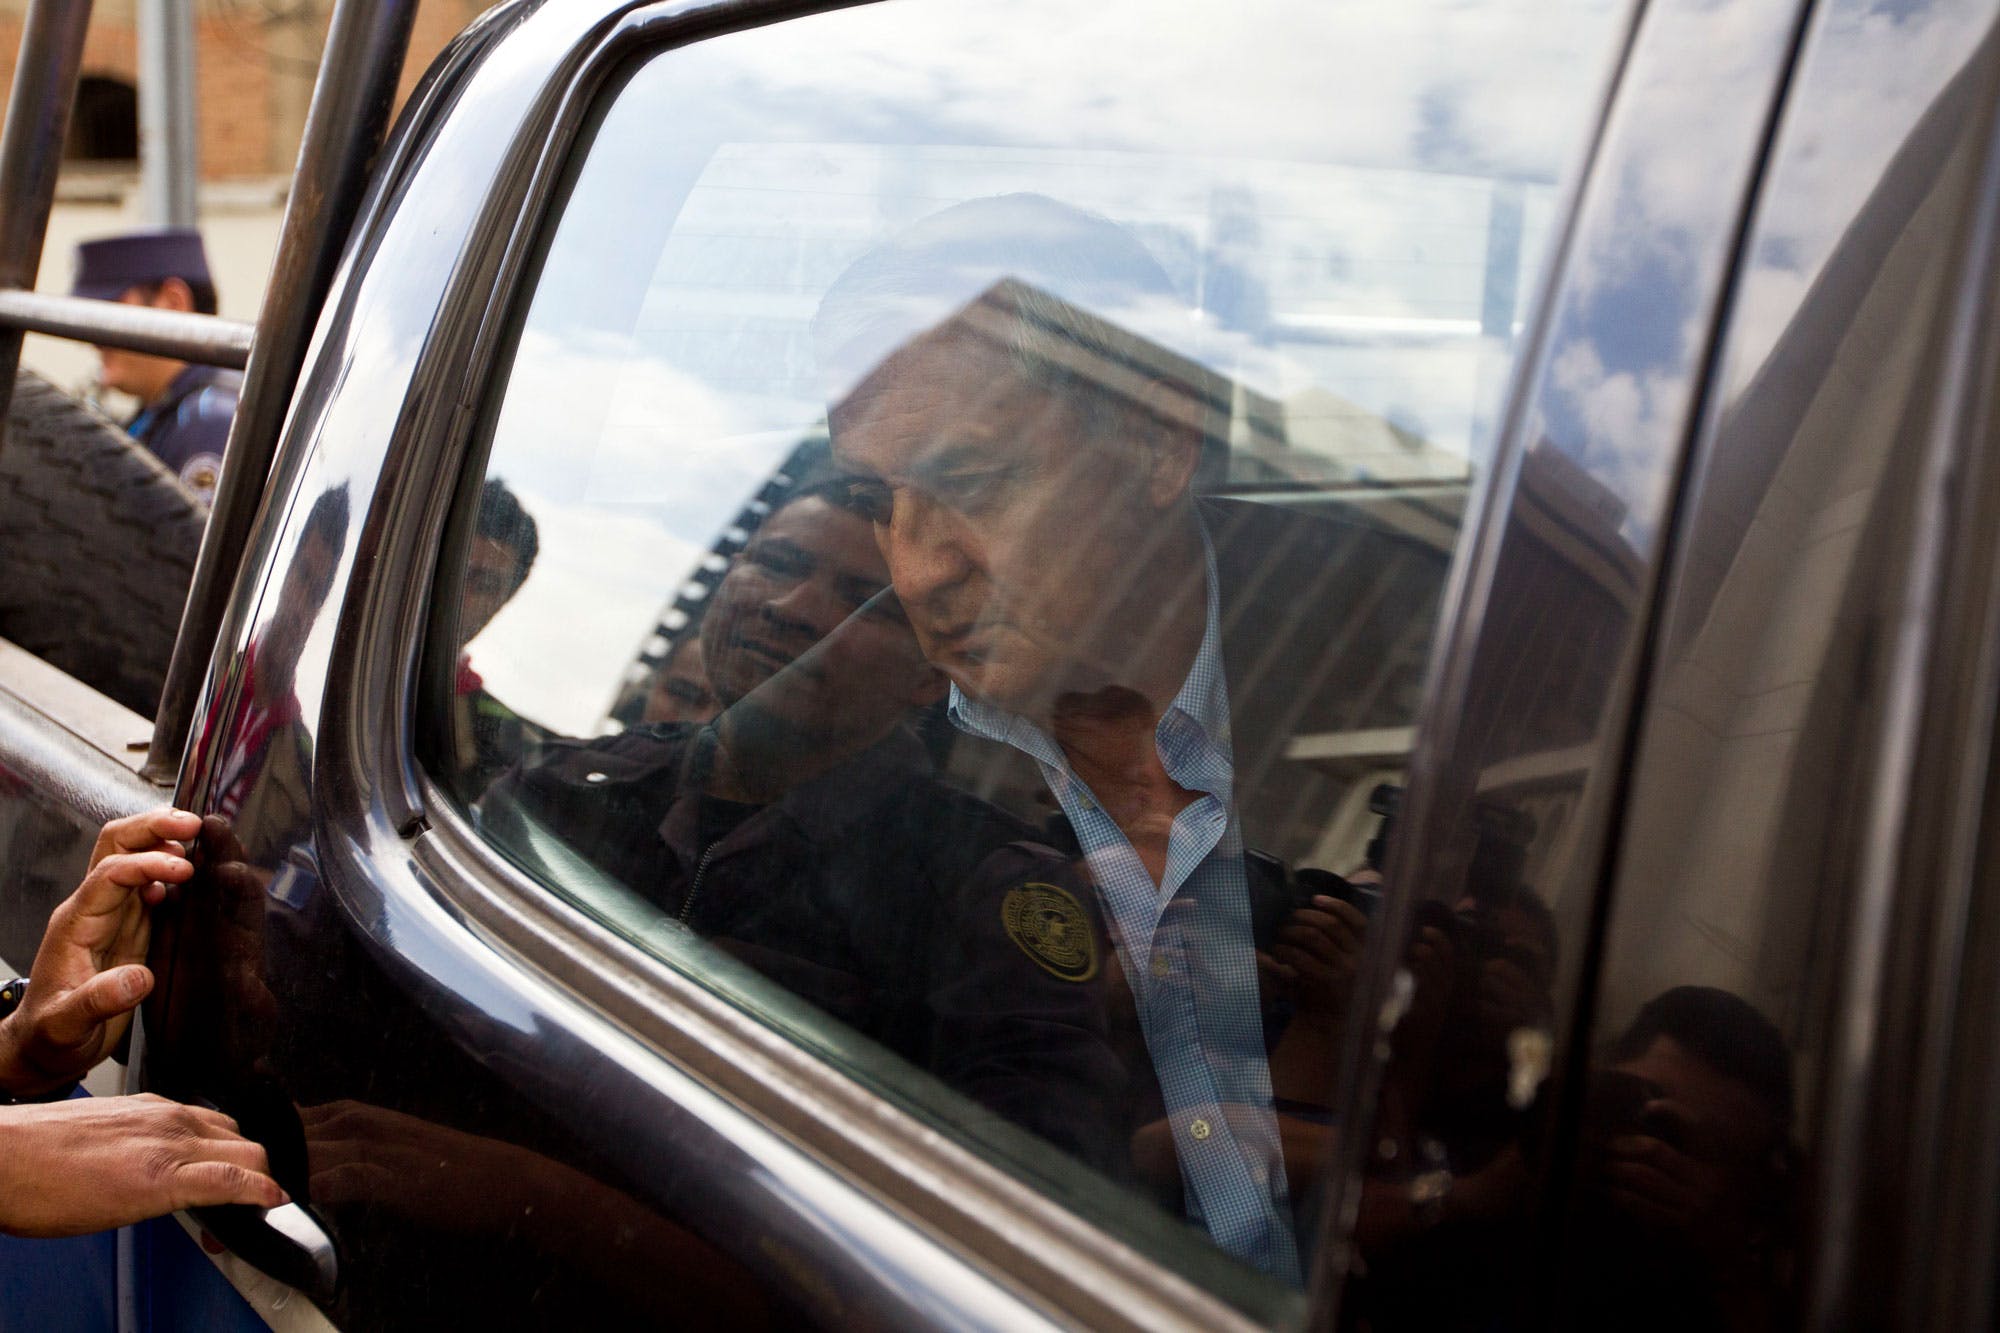 Guatemalan former President Otto Perez Molina arrives in a police vehicle to a court hearing in Guatemala City, Monday, June 13, 2016. The ex-president faces charges of money laundering and conspiracy. Three senior Guatemalan cabinet, all who served under Perez Molina, were arrested Saturday on corruption charges, and authorities said they were seeking to detain two more as part of a continuing crackdown that has seen the former president and his vice president jailed. (AP Photo/Moises Castillo)